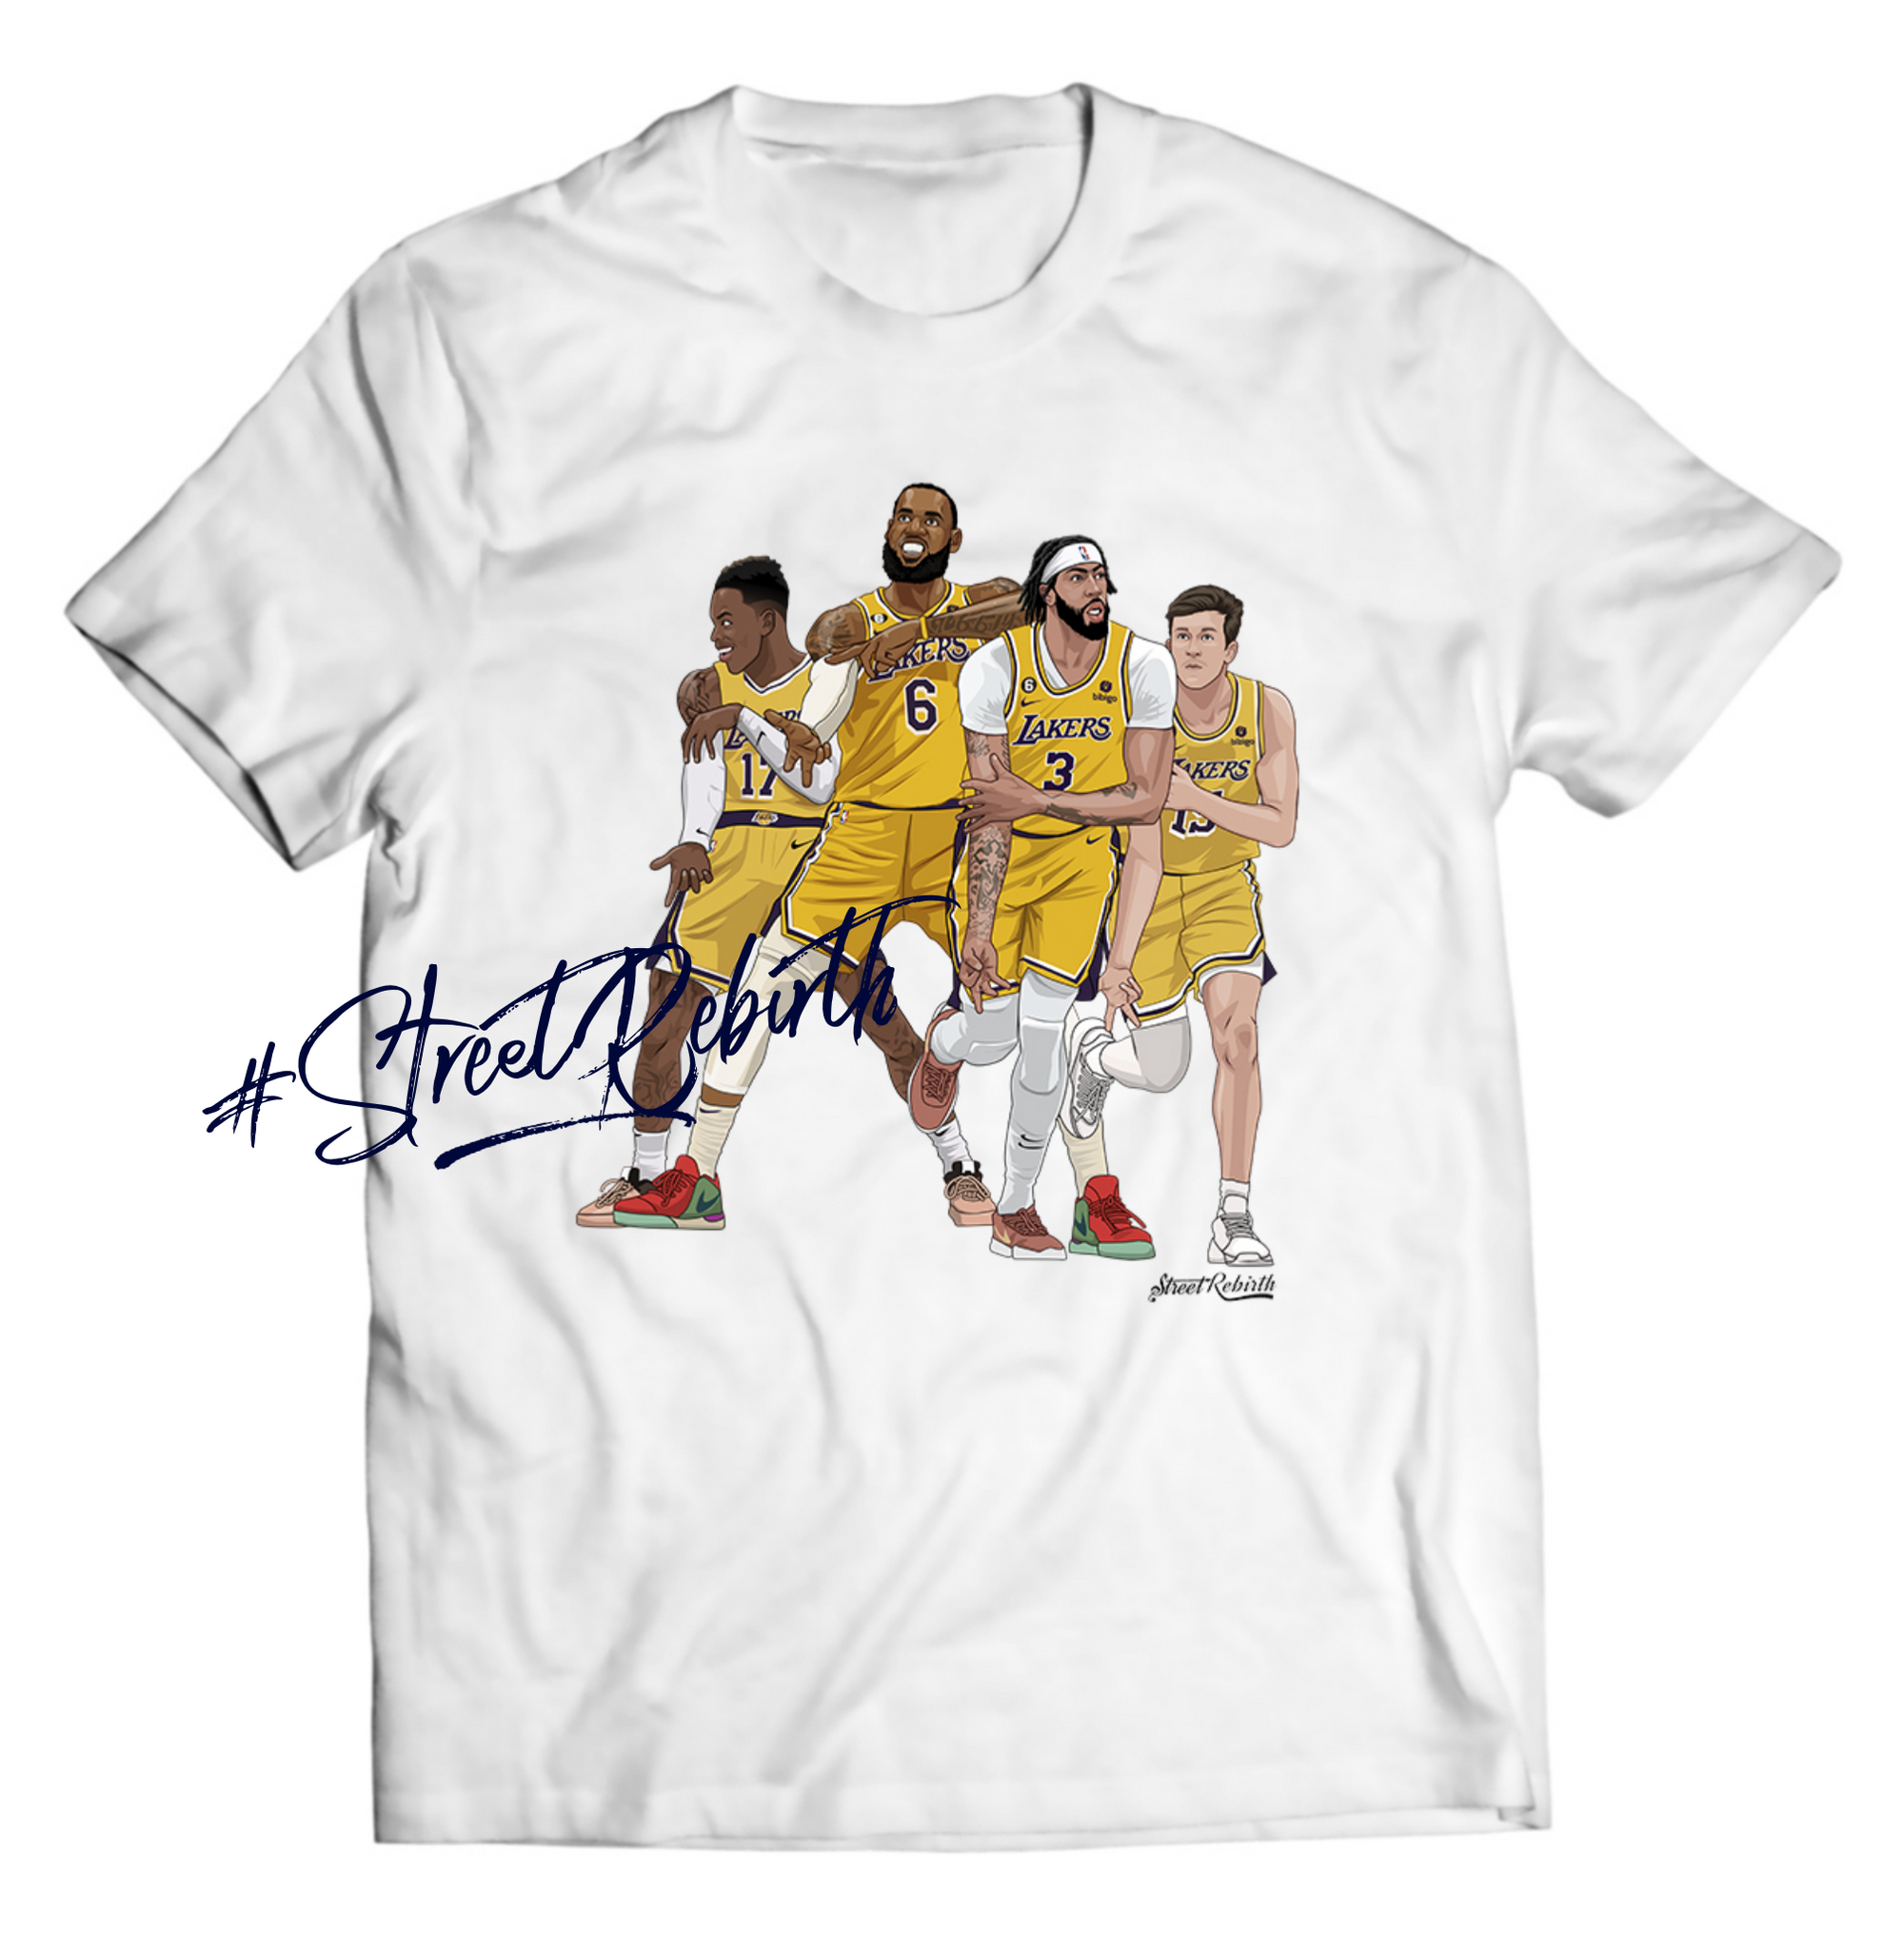 LakeShow 3 Point Gang Shirt - Direct To Garment Quality Print - Unisex Shirt - Gift For Him or Her